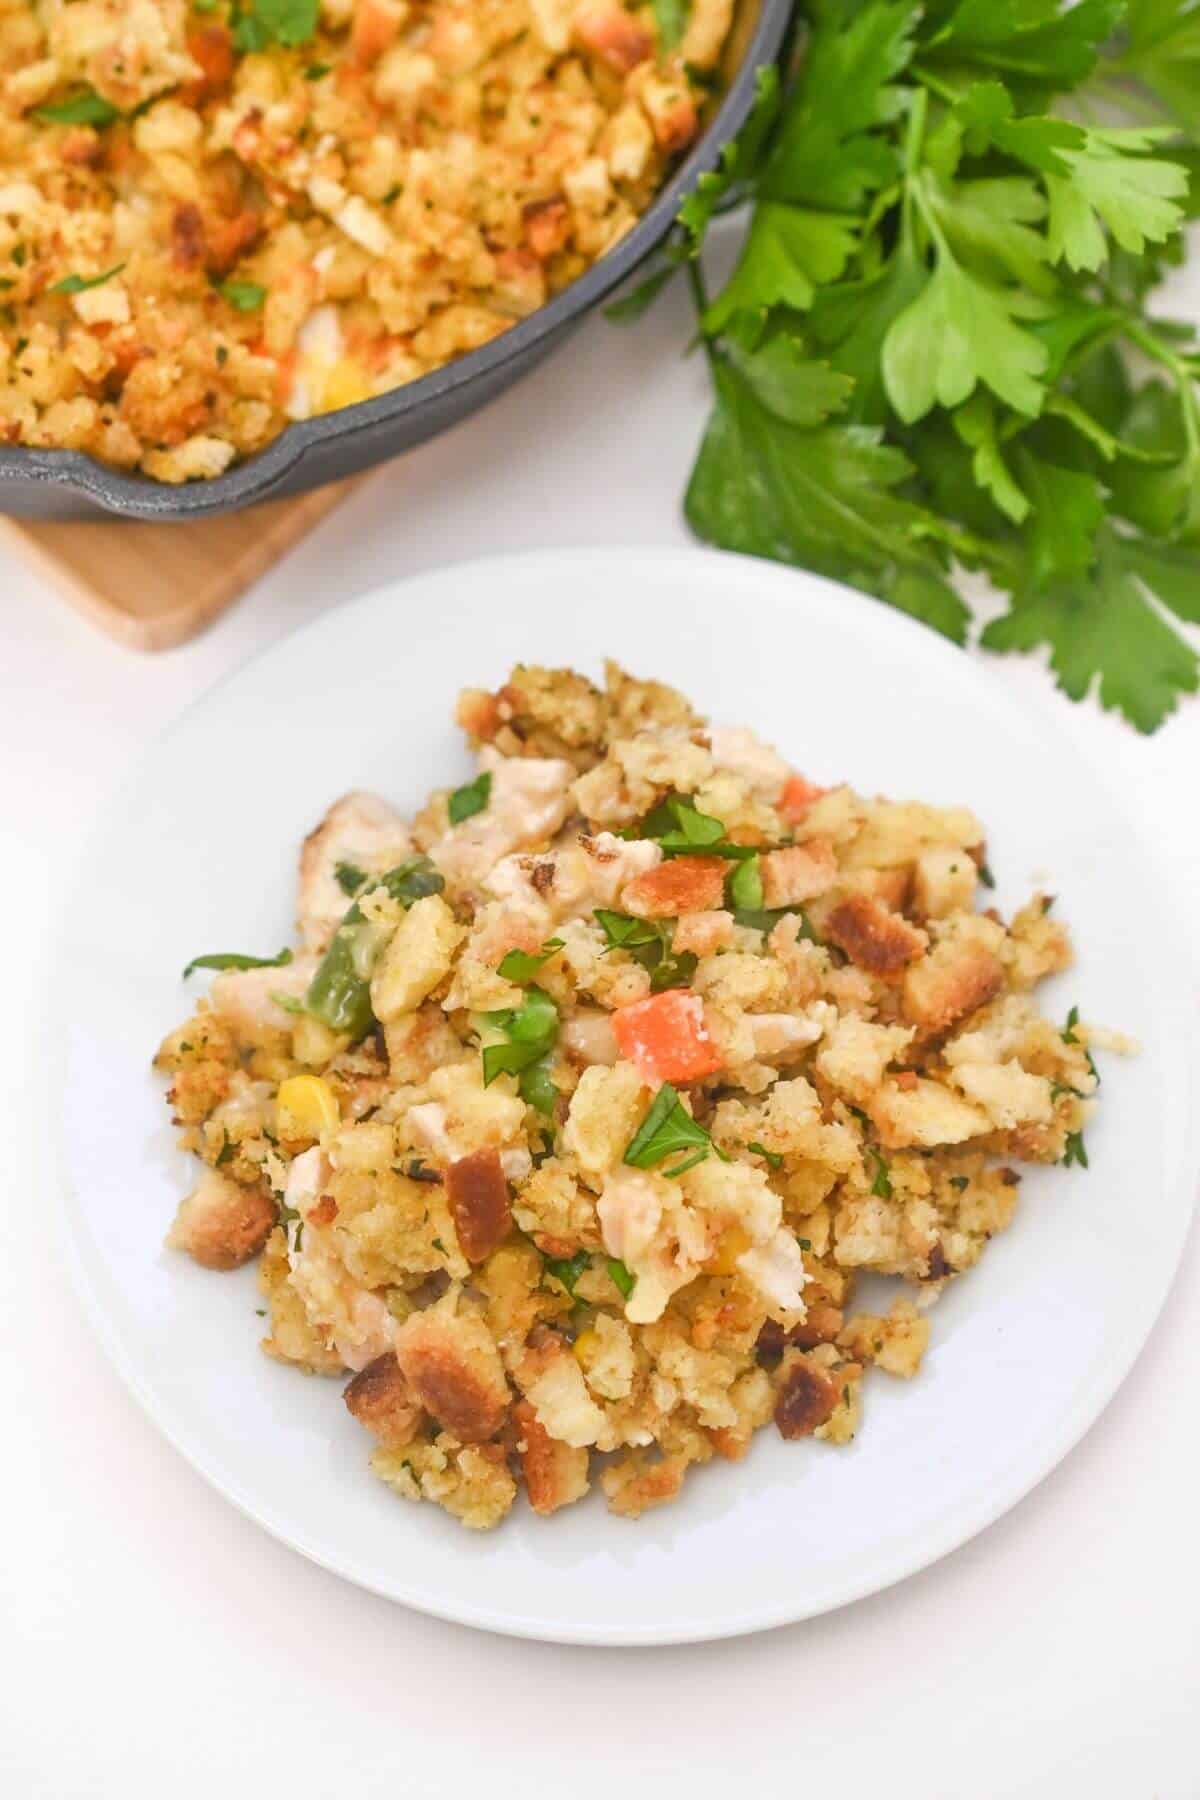 Chicken and stuffing on a white plate with parsley.